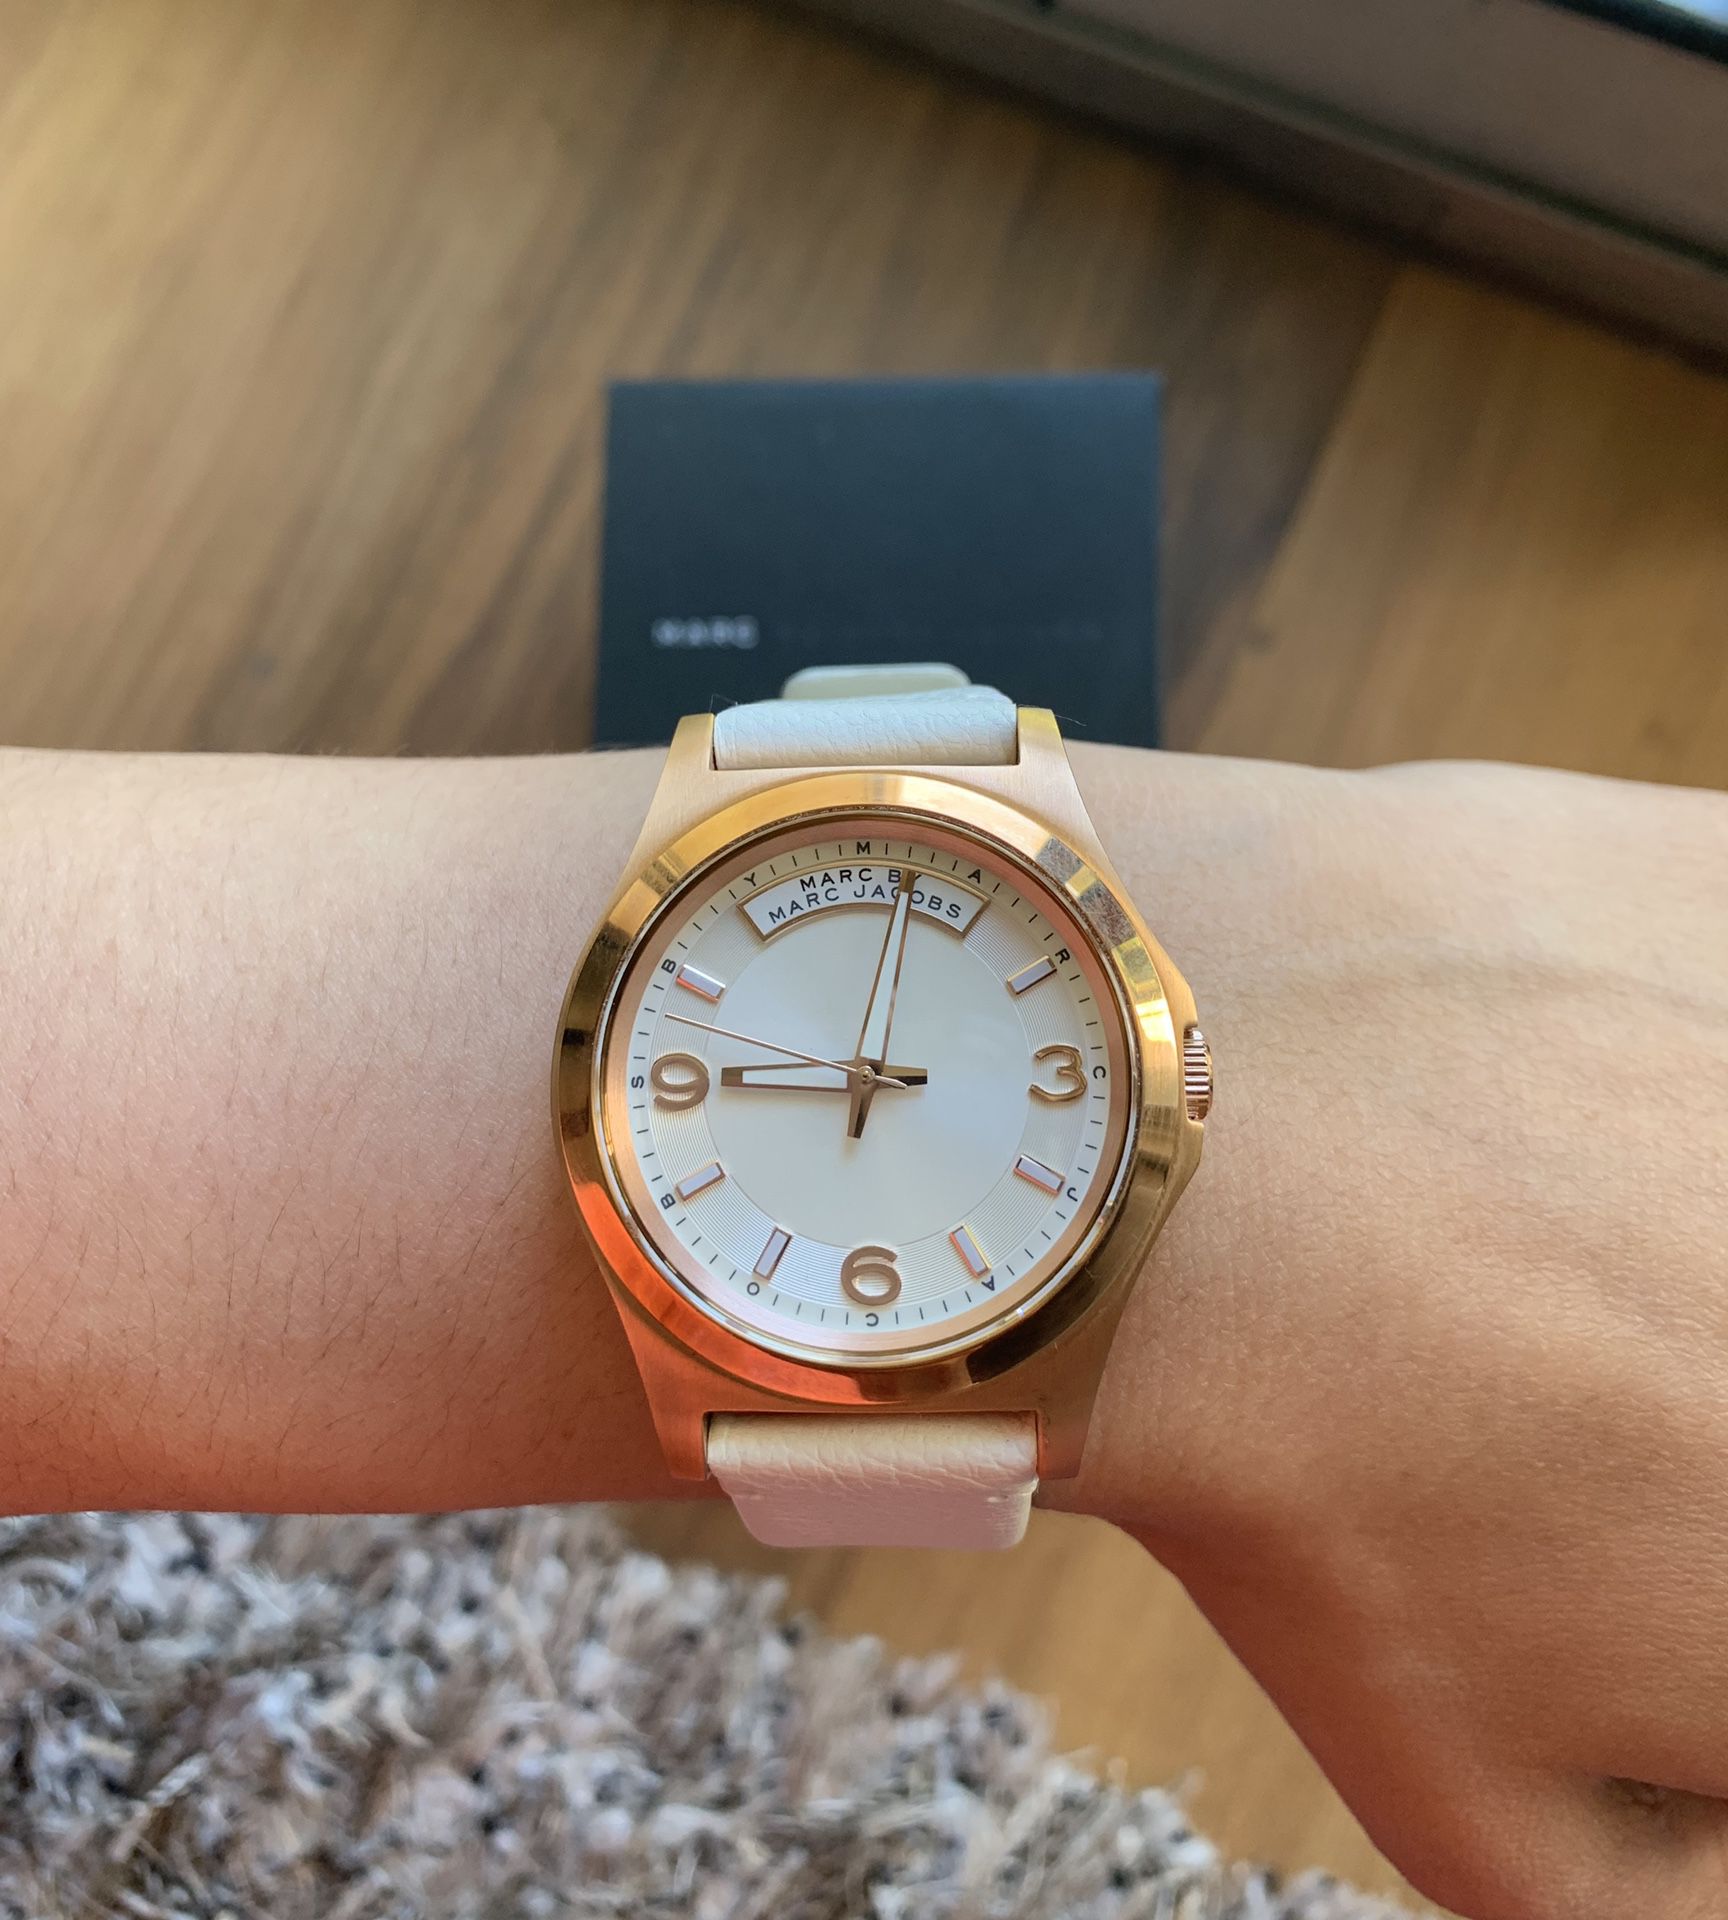 Marc Jacobs new white and rose gold watch